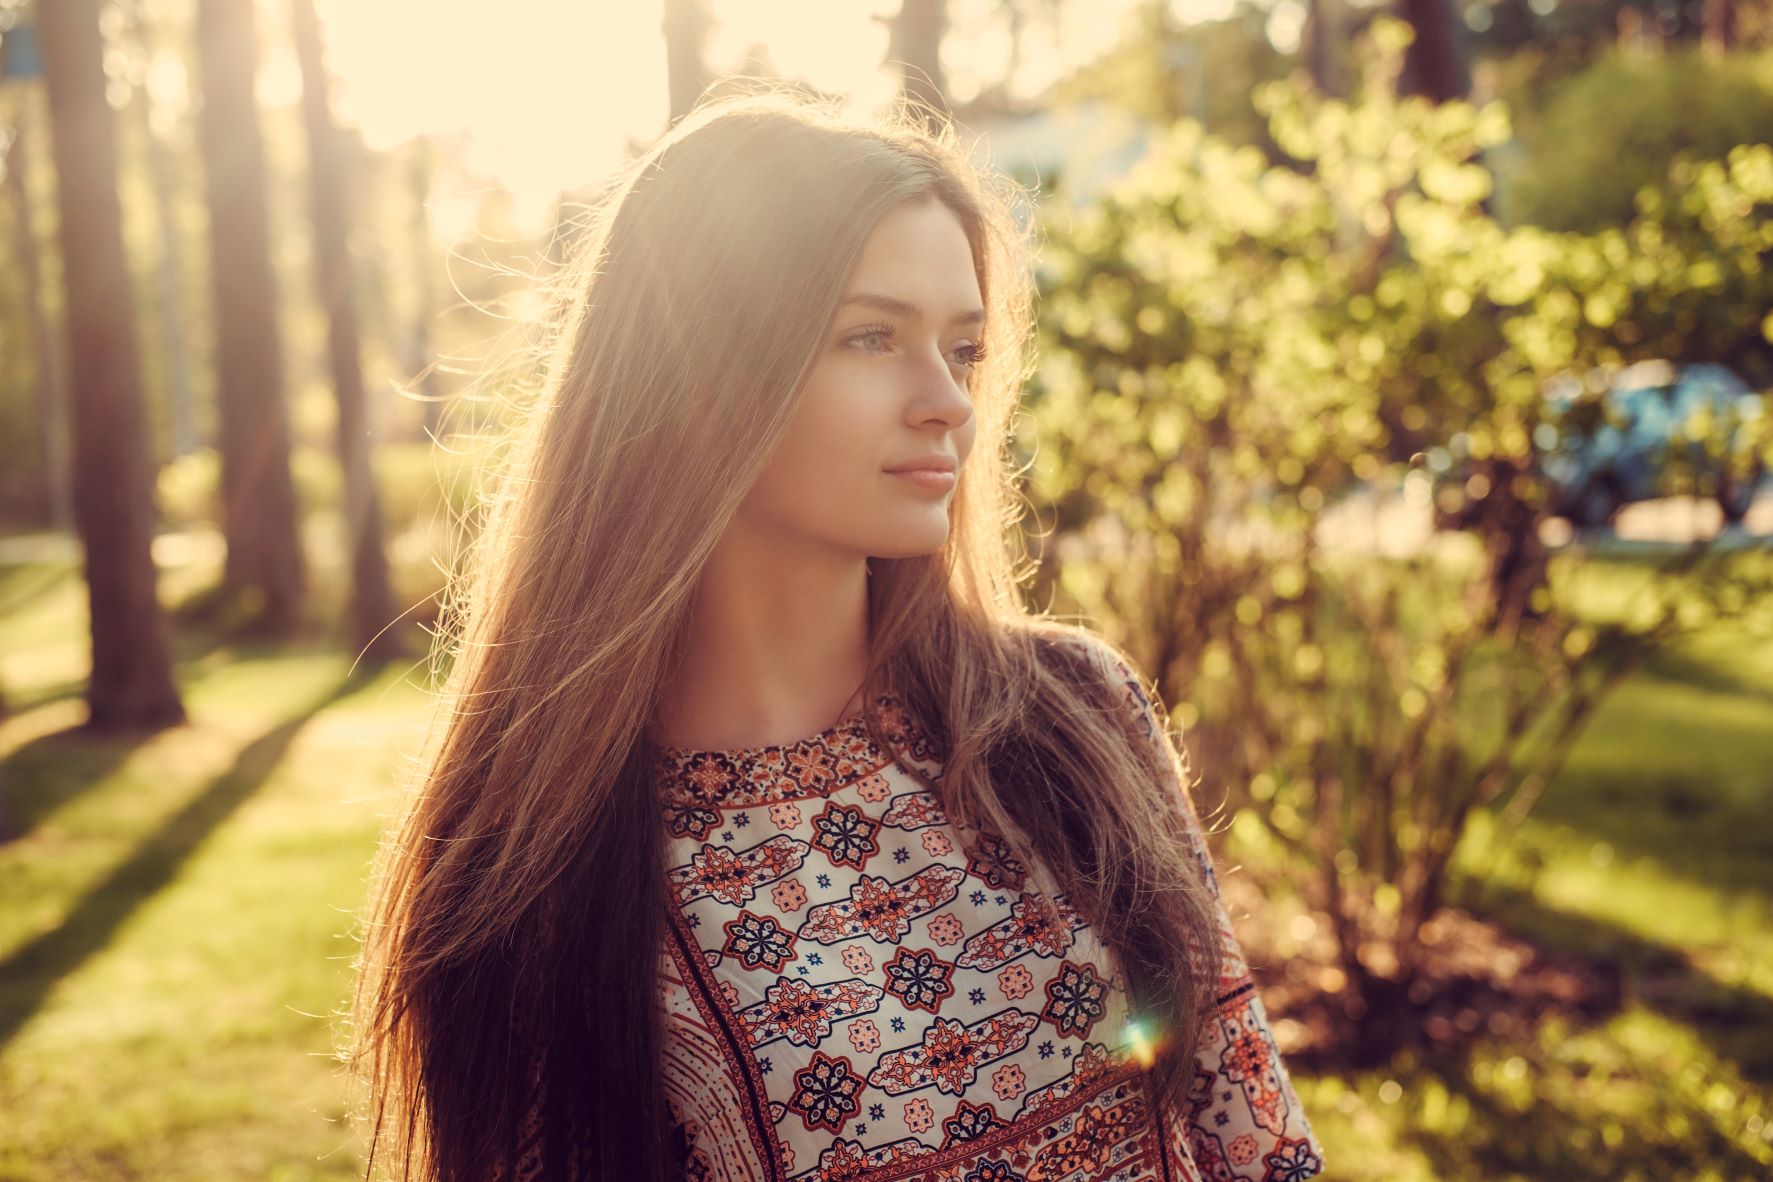 A woman with long hair that falls to mid-back standing outside in the sunlight